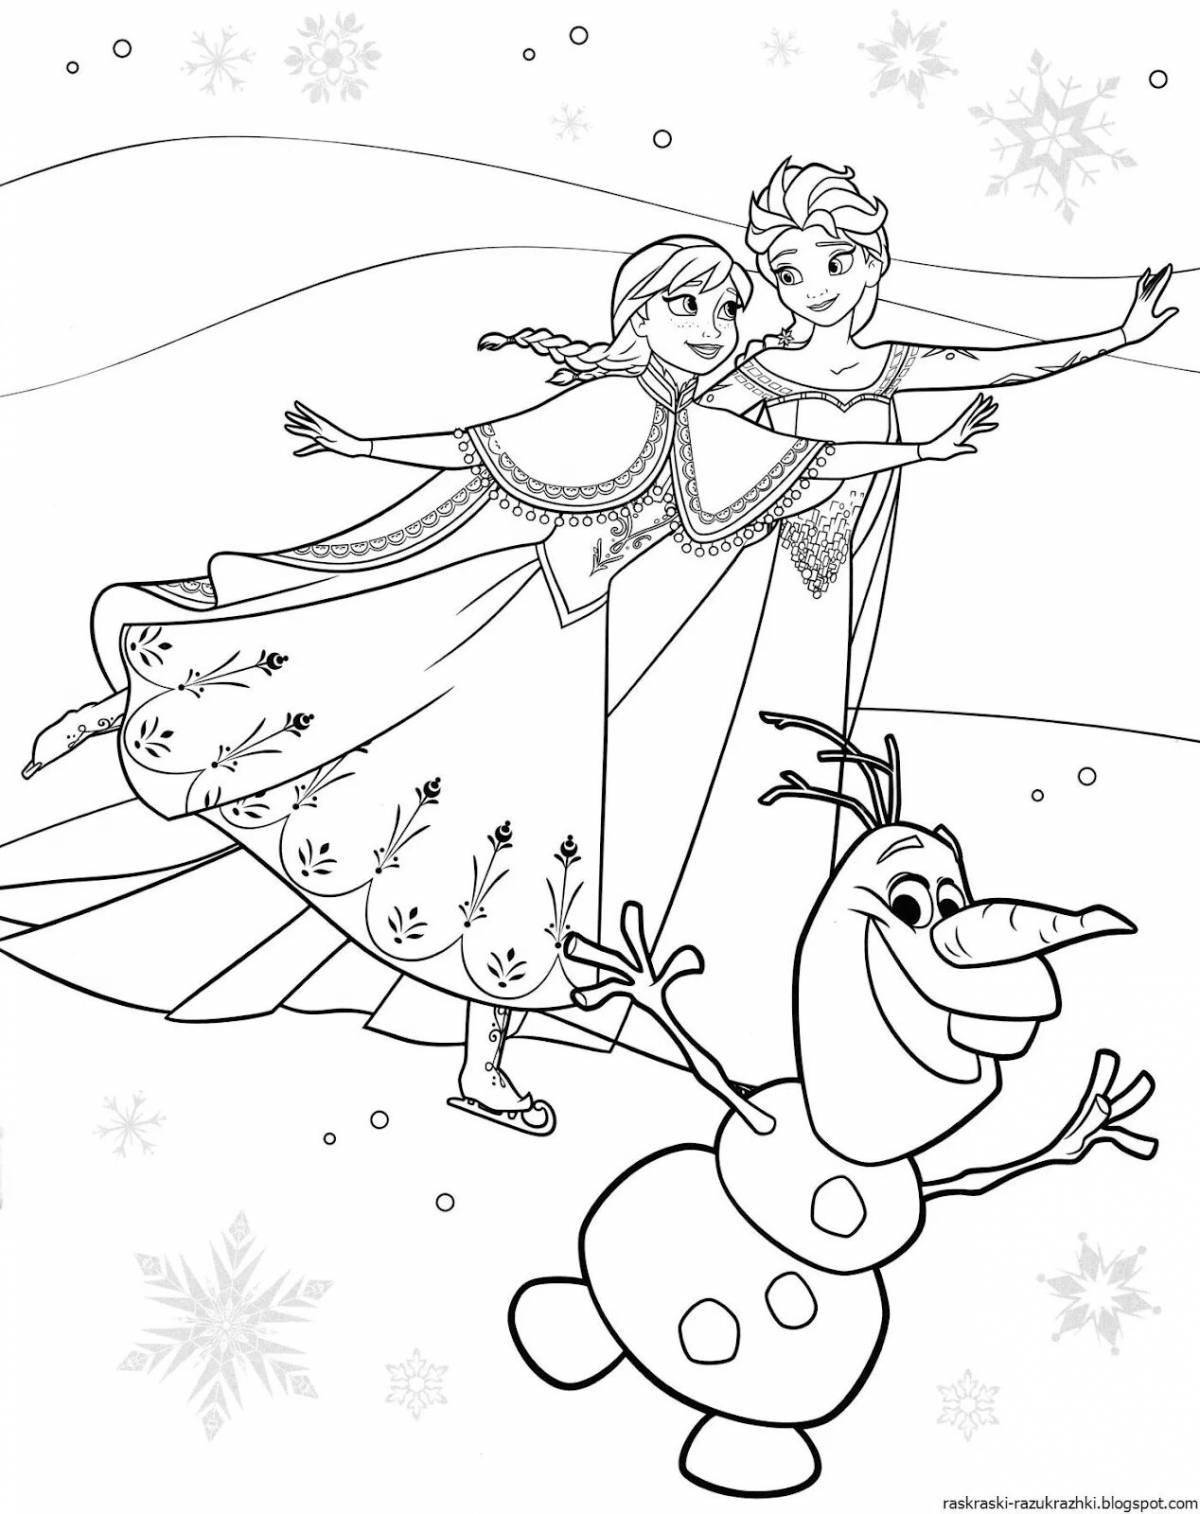 Delightful Elsa coloring book for kids 3-4 years old